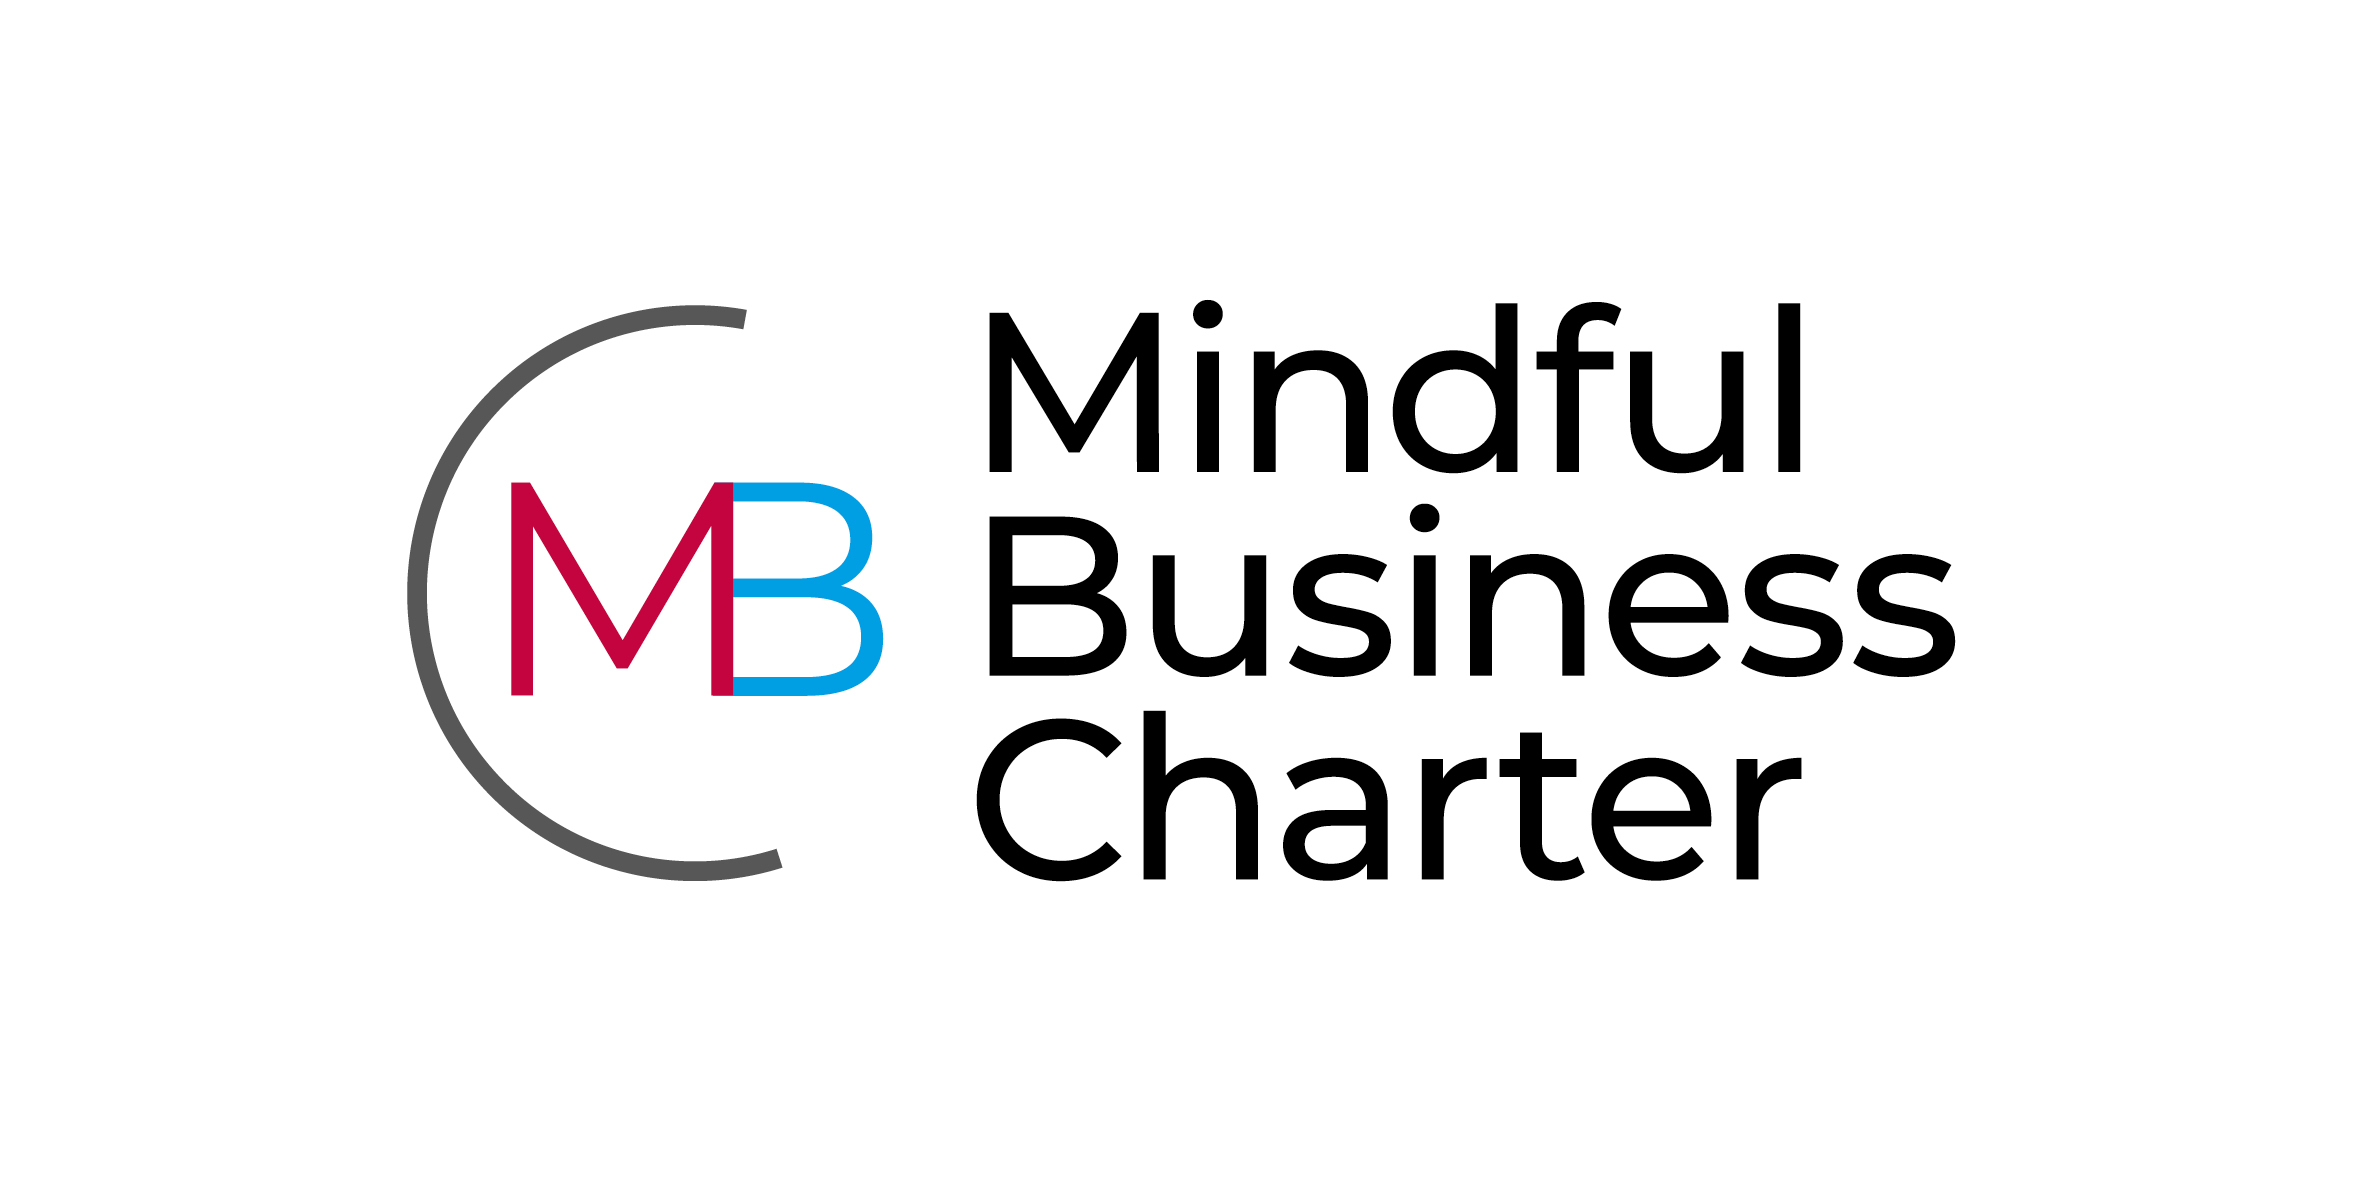 Mindful Business Charter